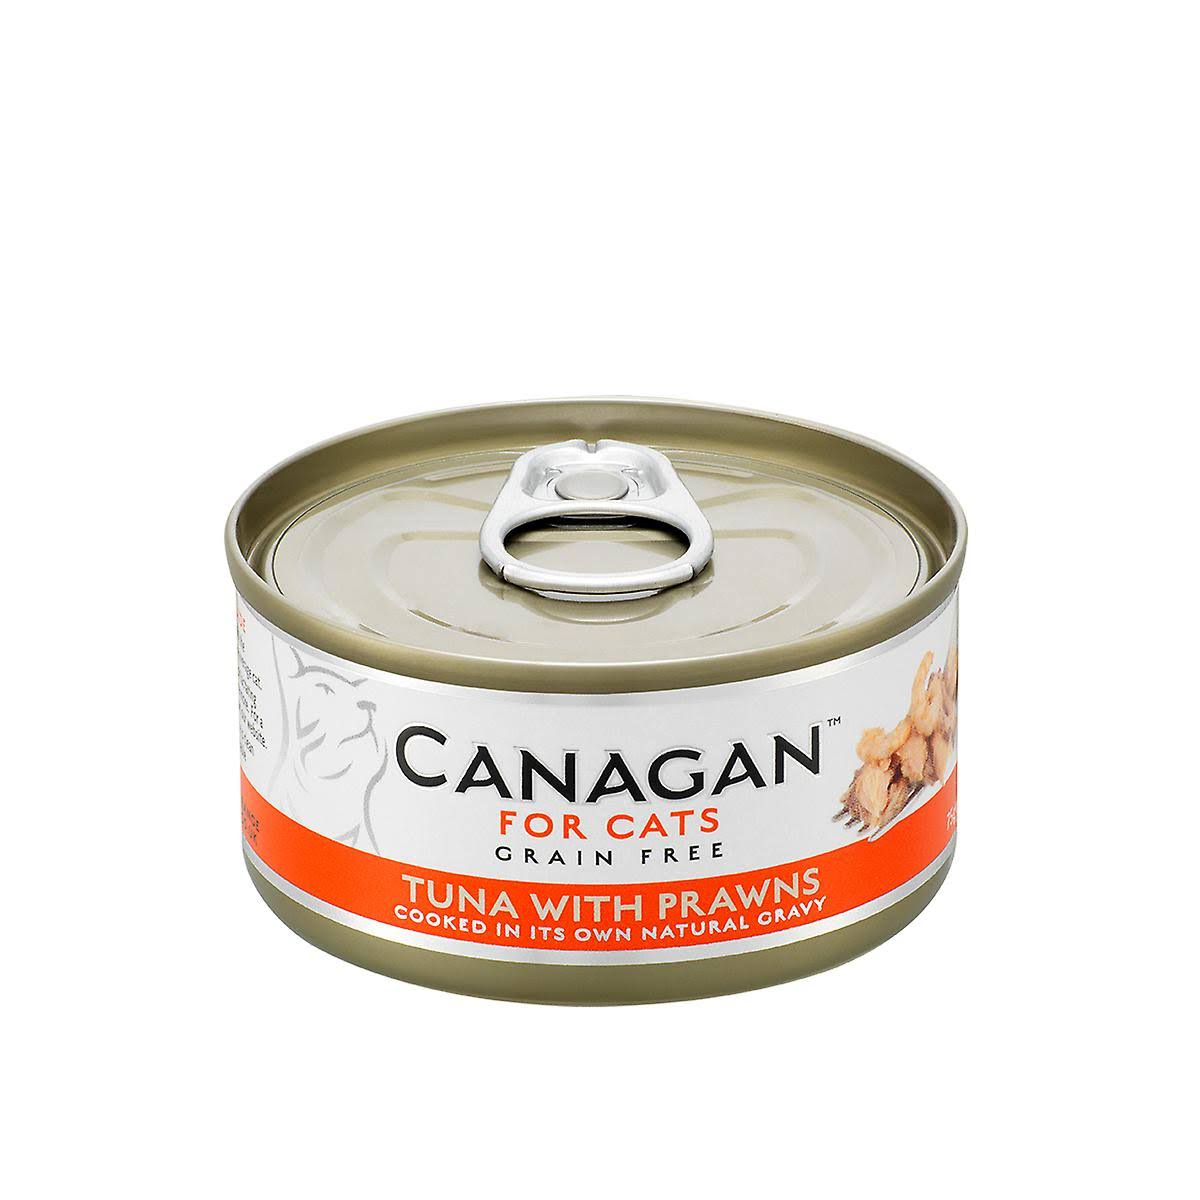 Canagan 75g Tuna with Prawns Cat Wet Food Can - 75g Can